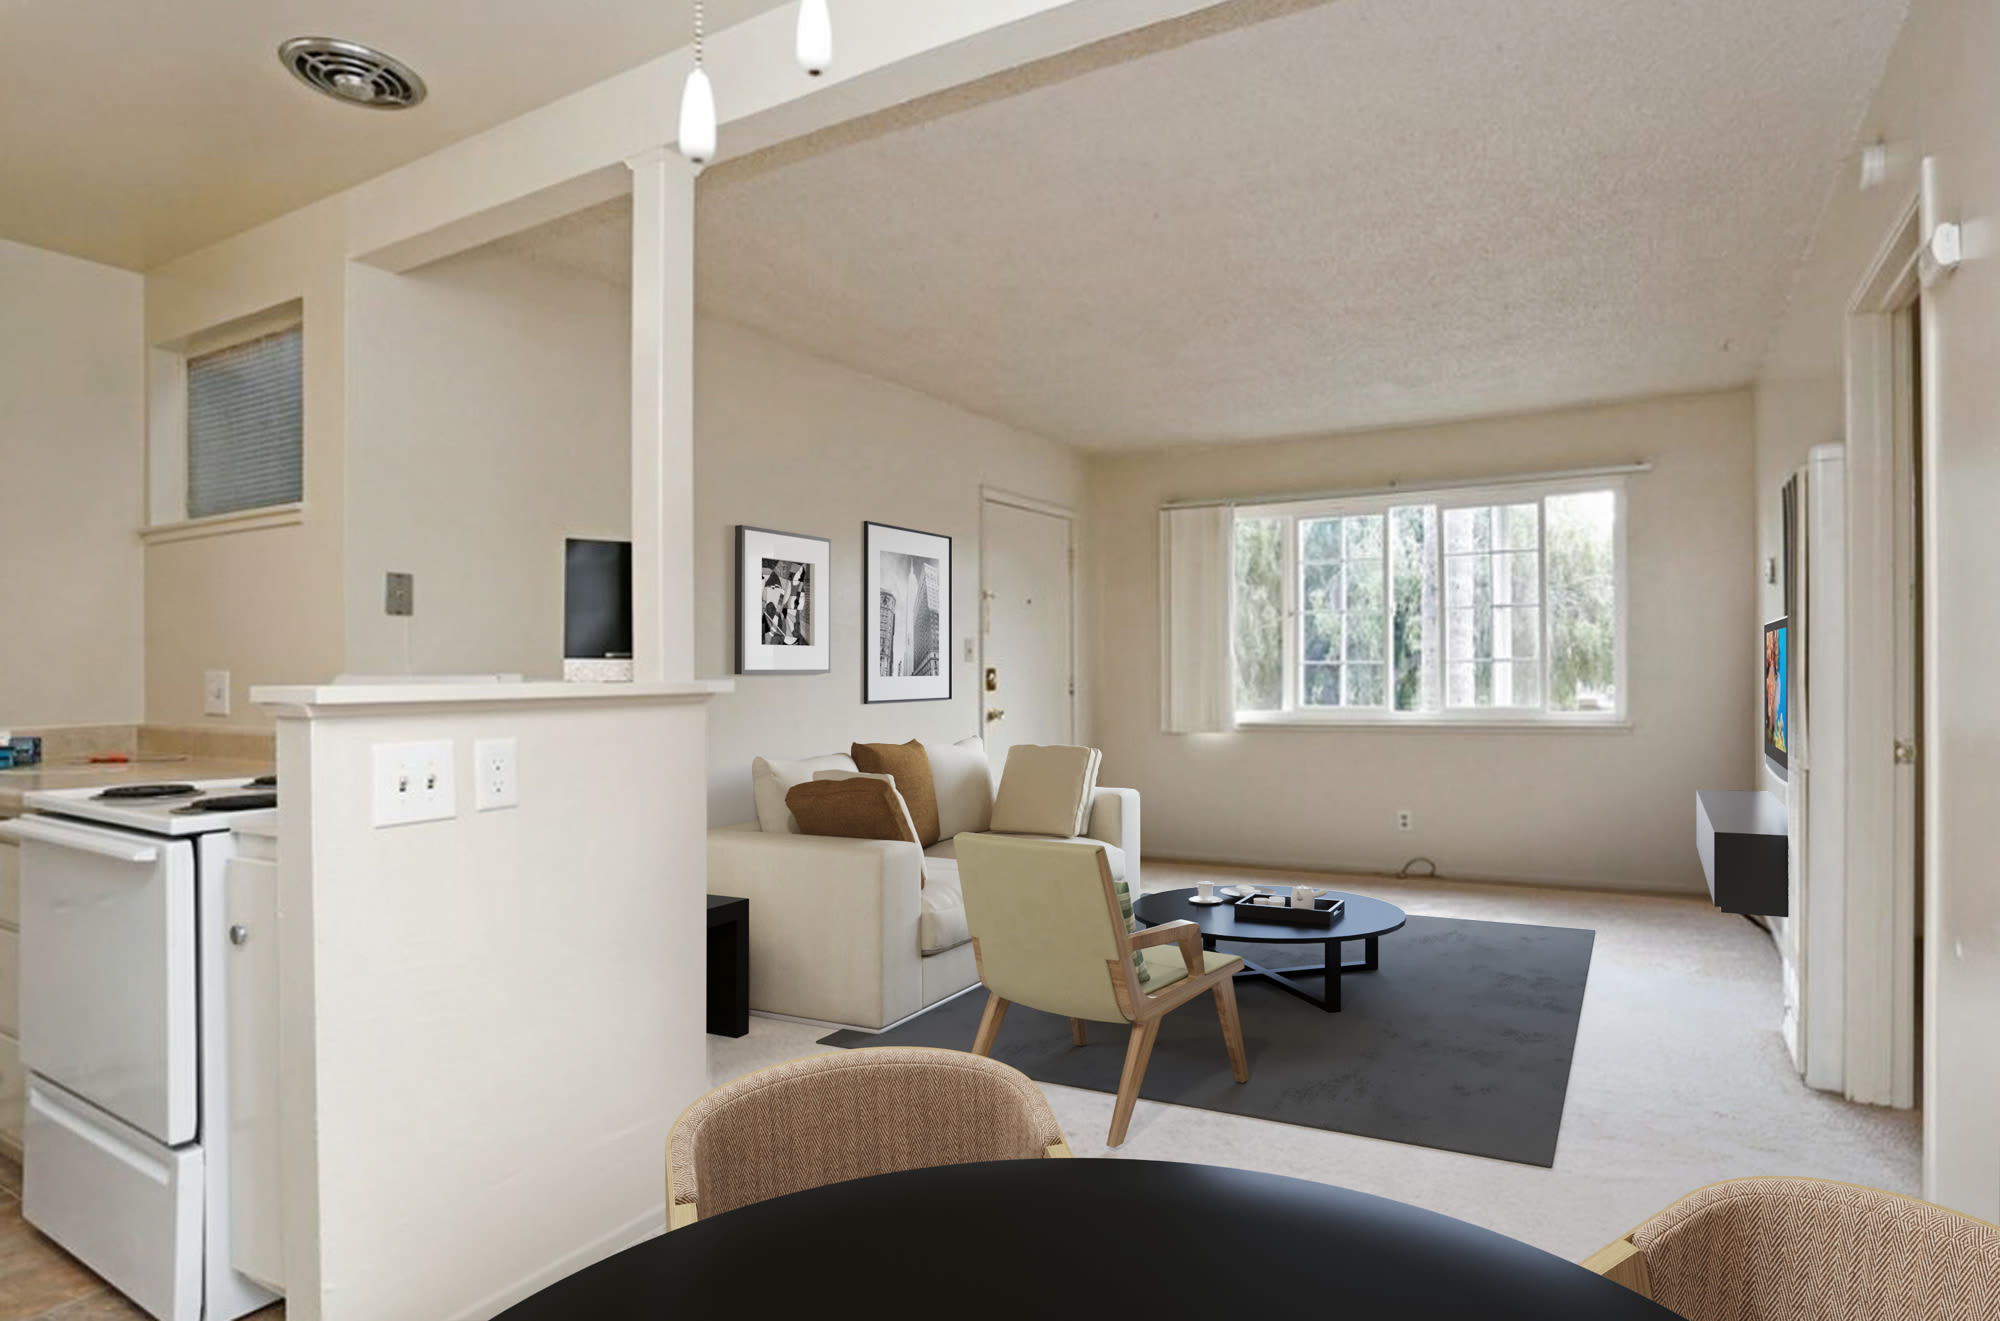 Furnished living room at Coronado Apartments in Fremont, California